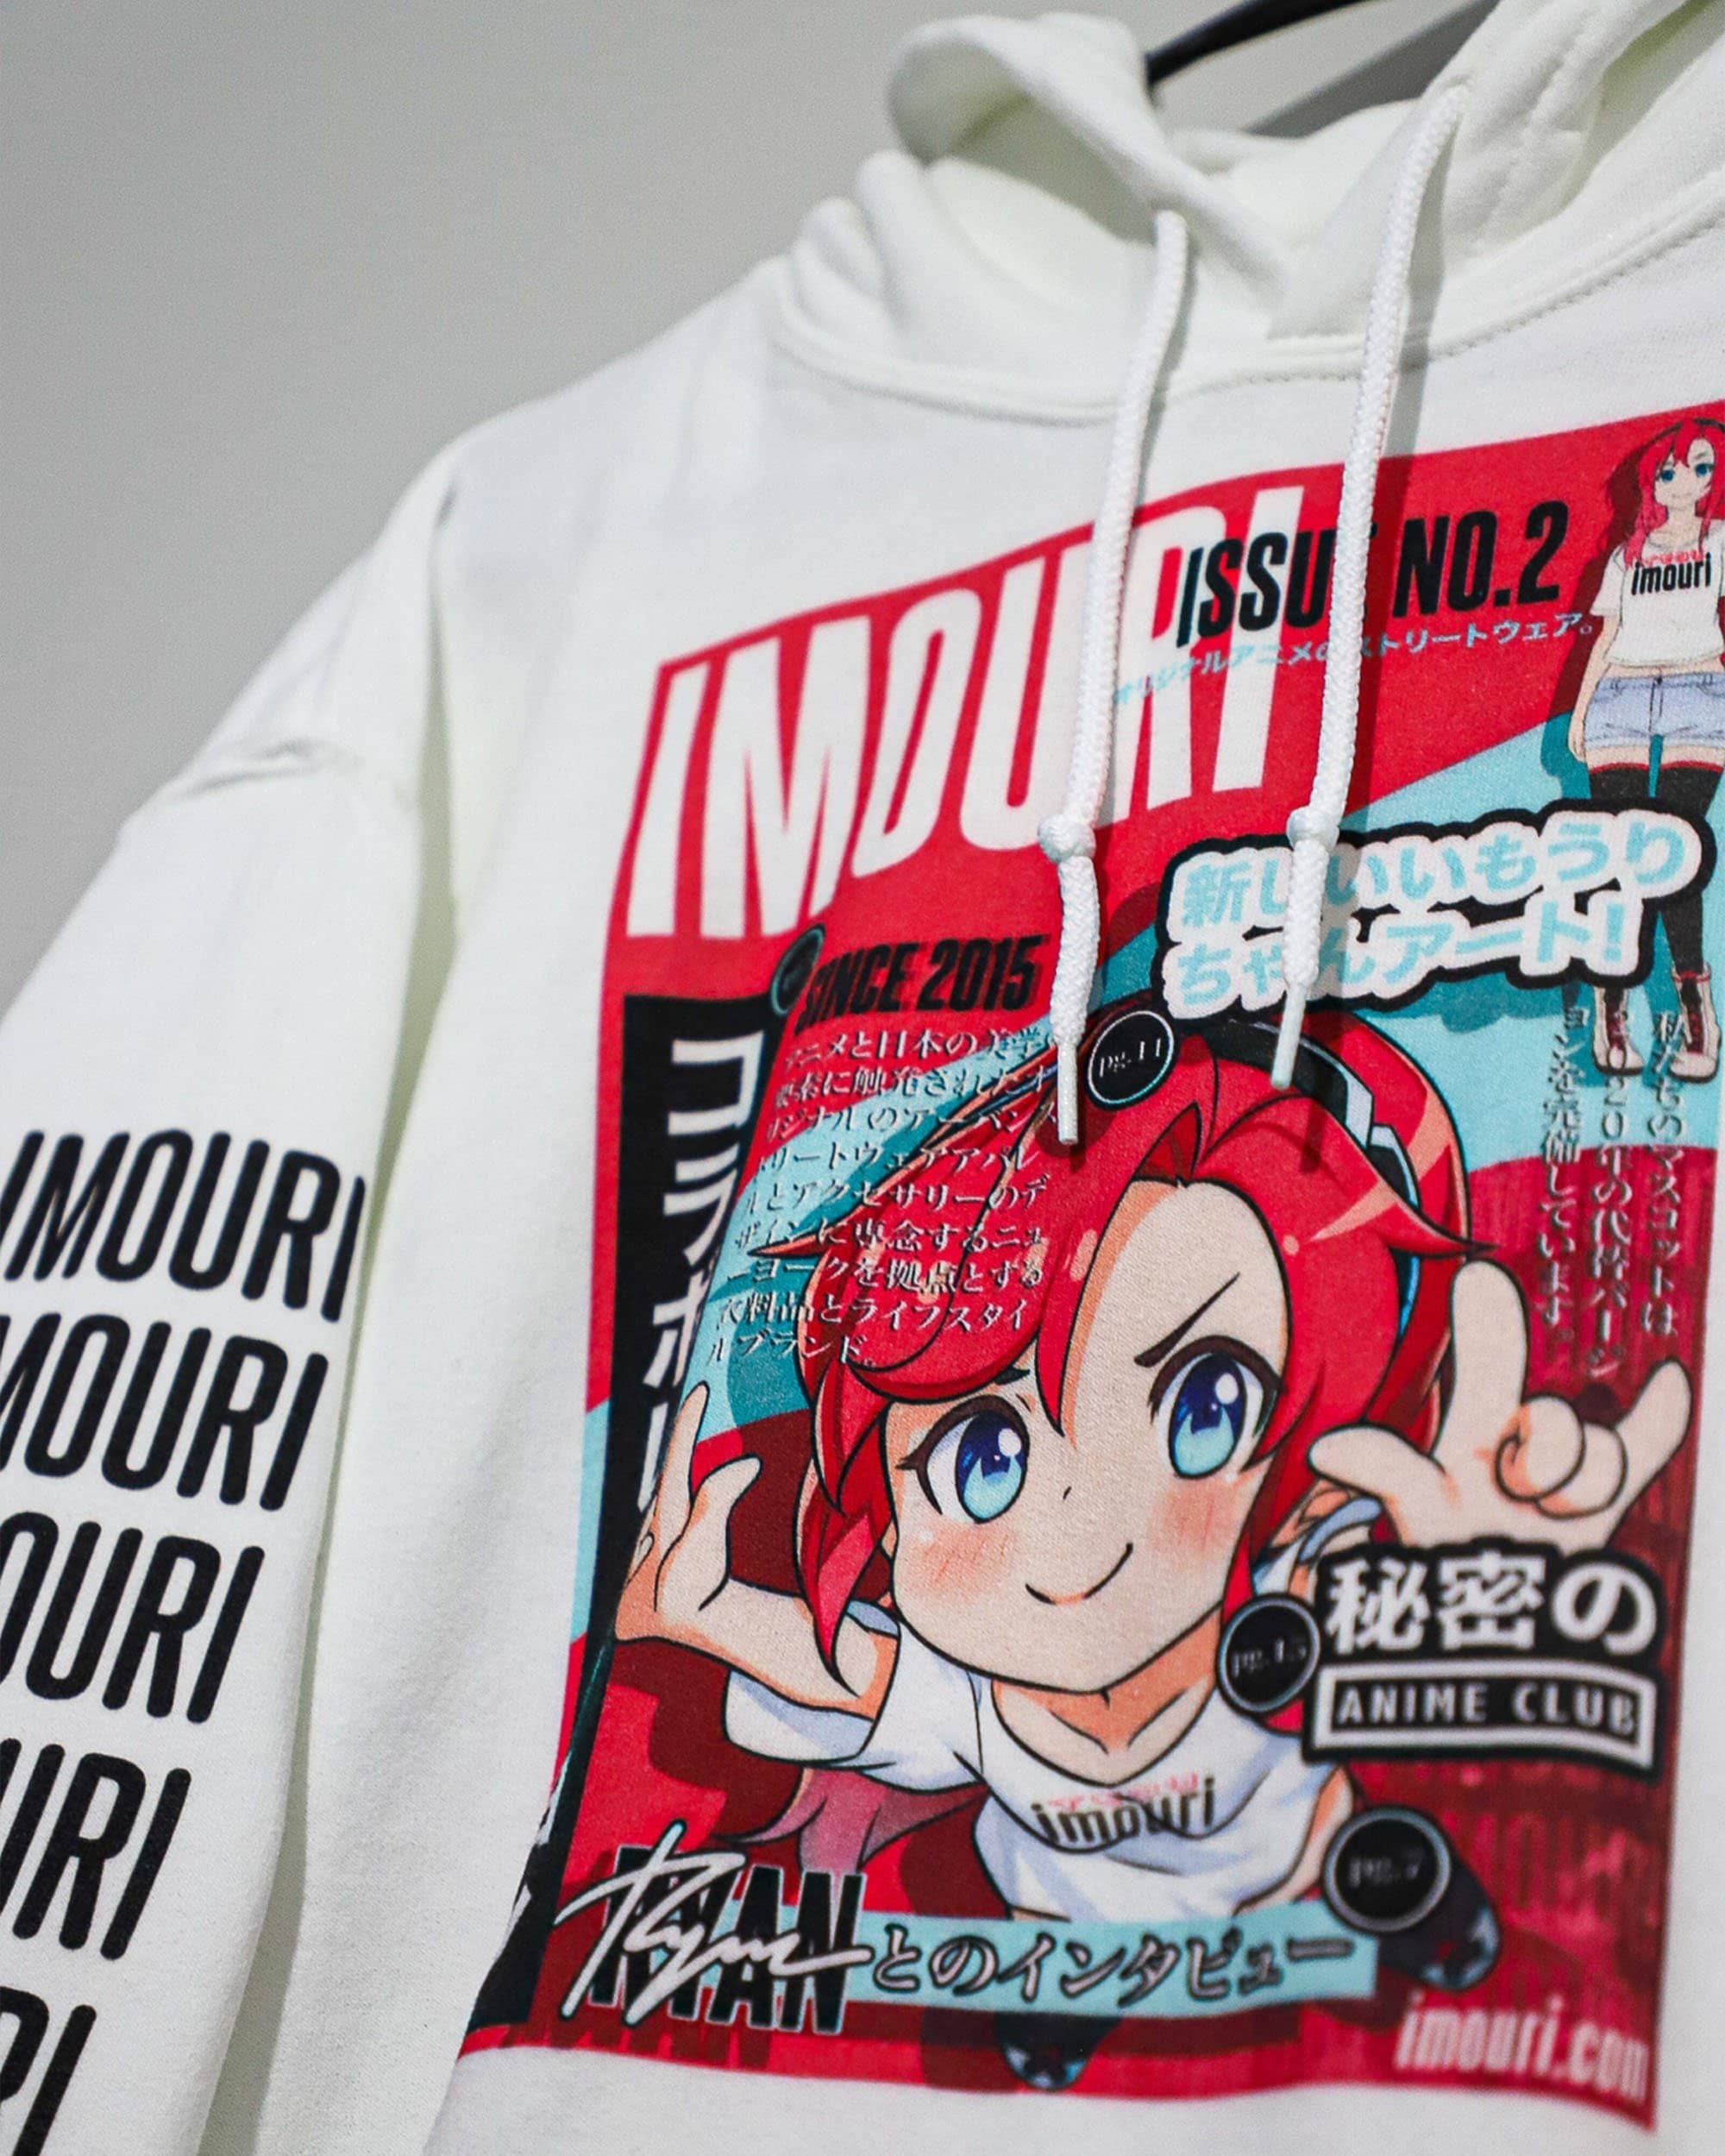 Anime Hoodie Japanese Magazine Cover Imouri Chan Issue 2 